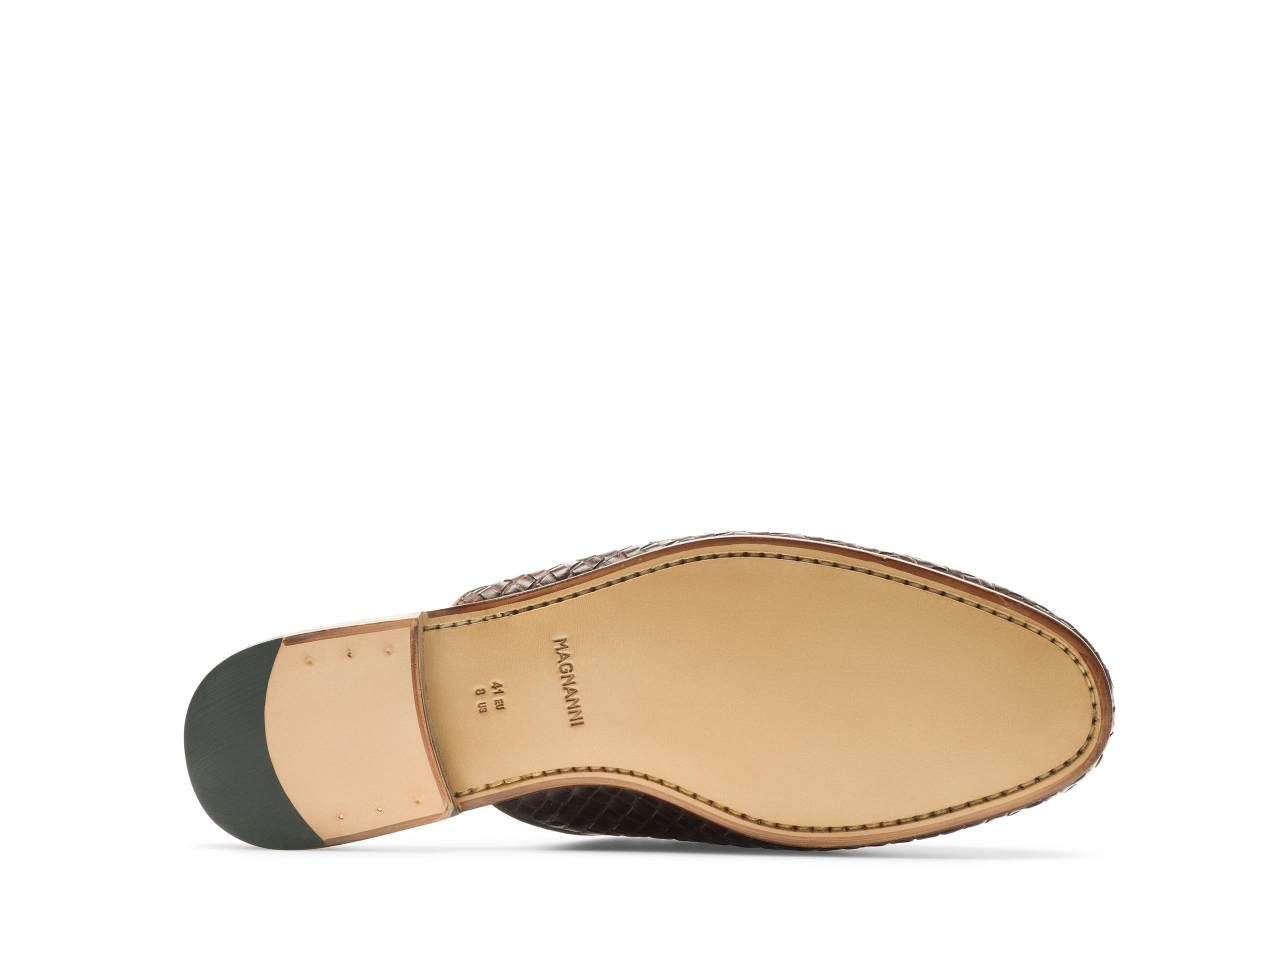 Sole of the Pachino Woven Midbrown